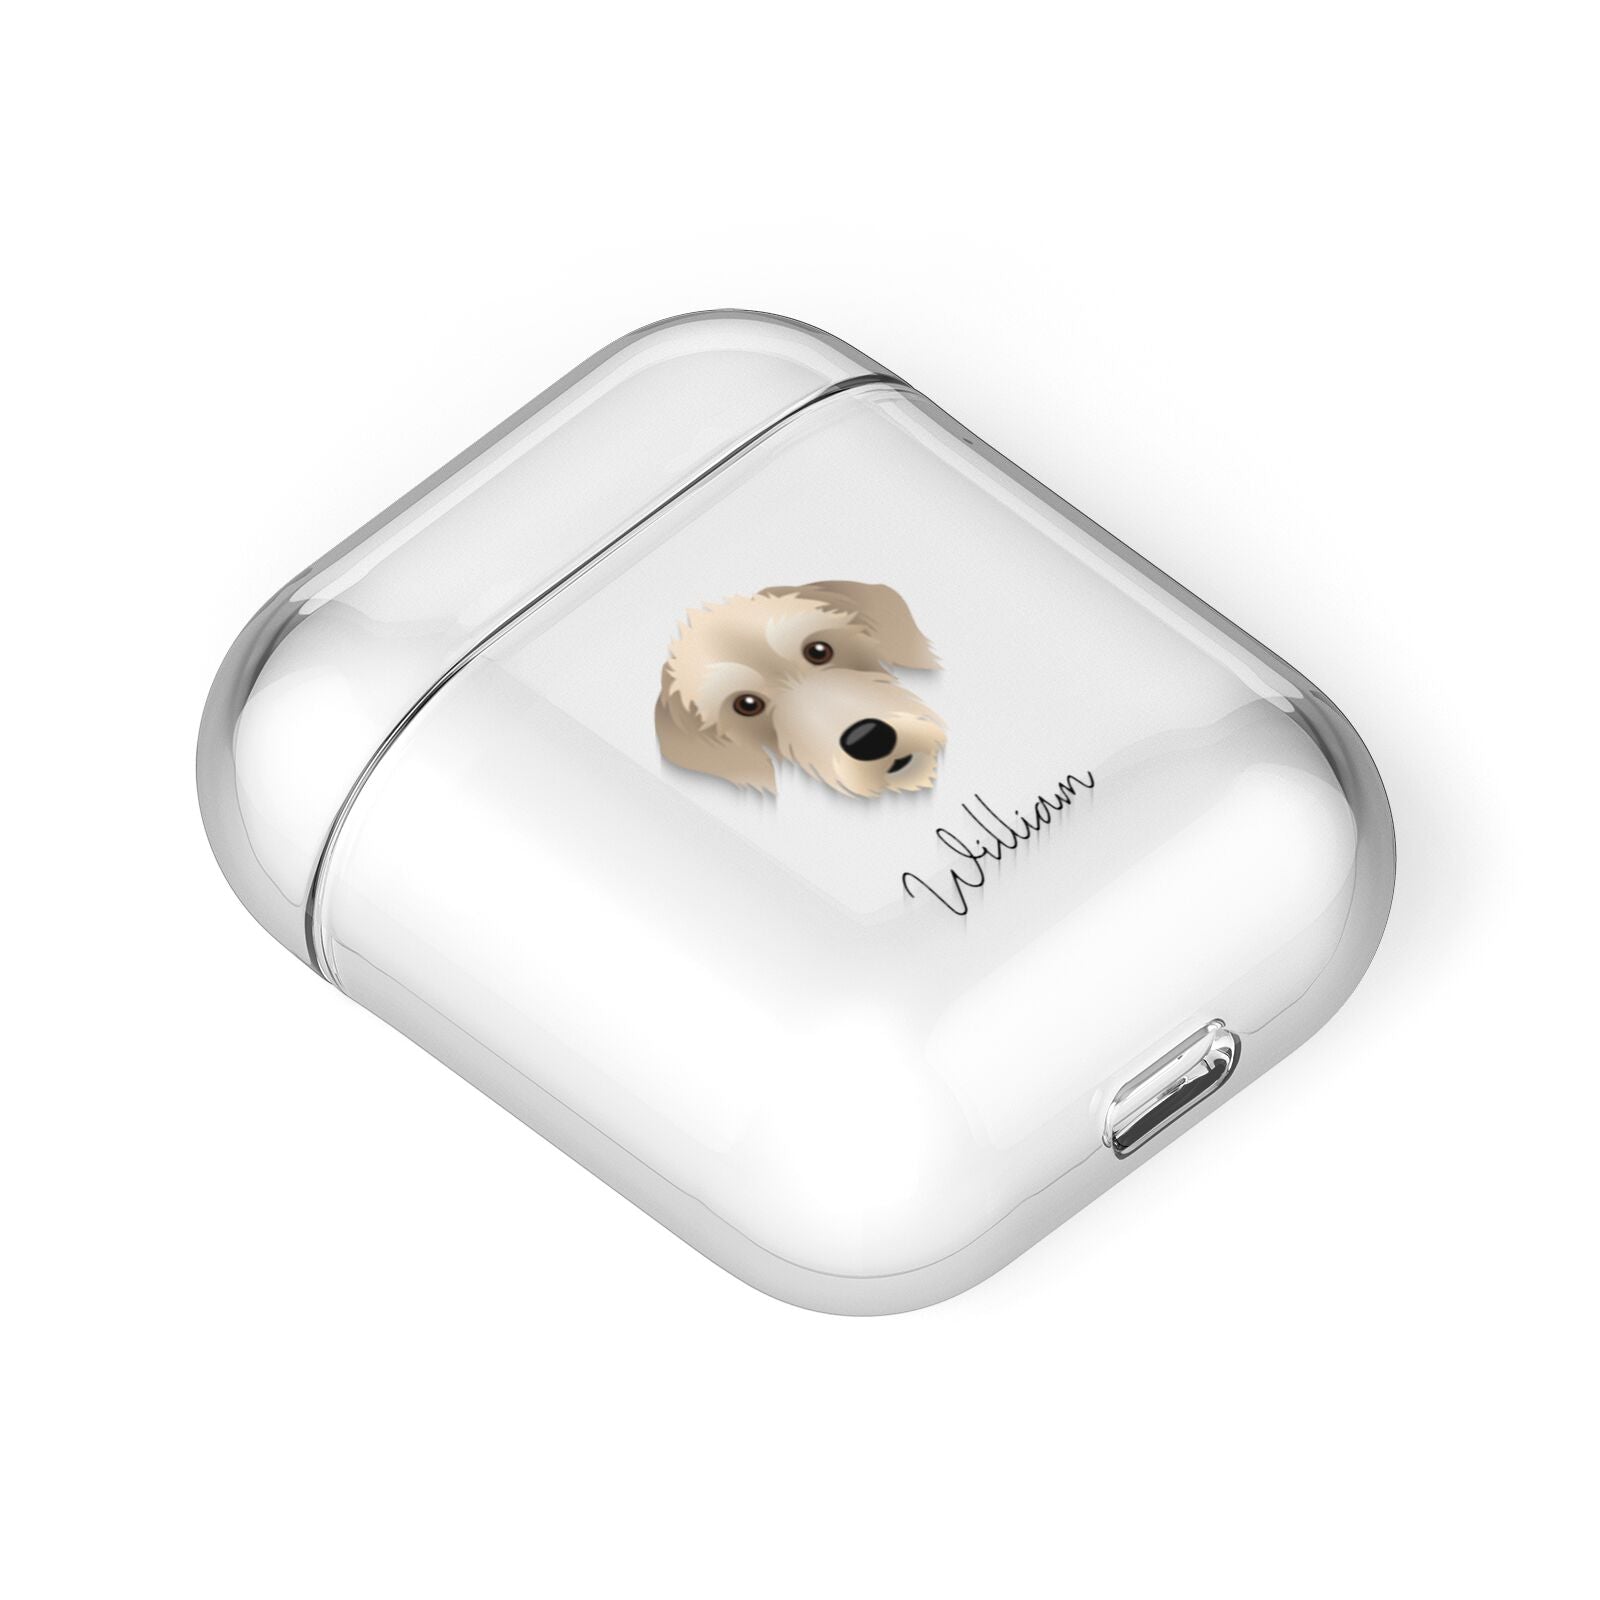 Bedlington Whippet Personalised AirPods Case Laid Flat